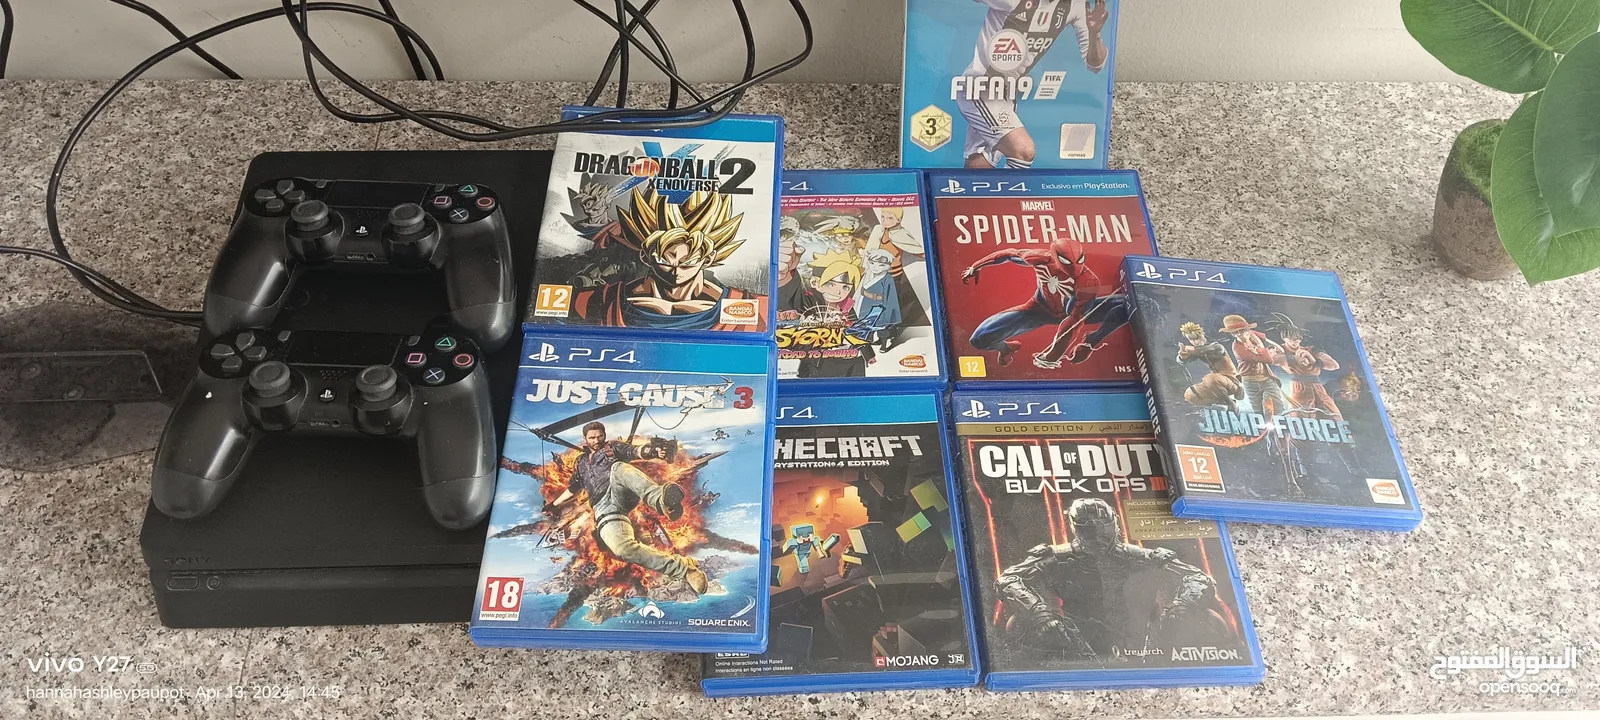 PS4 with games console